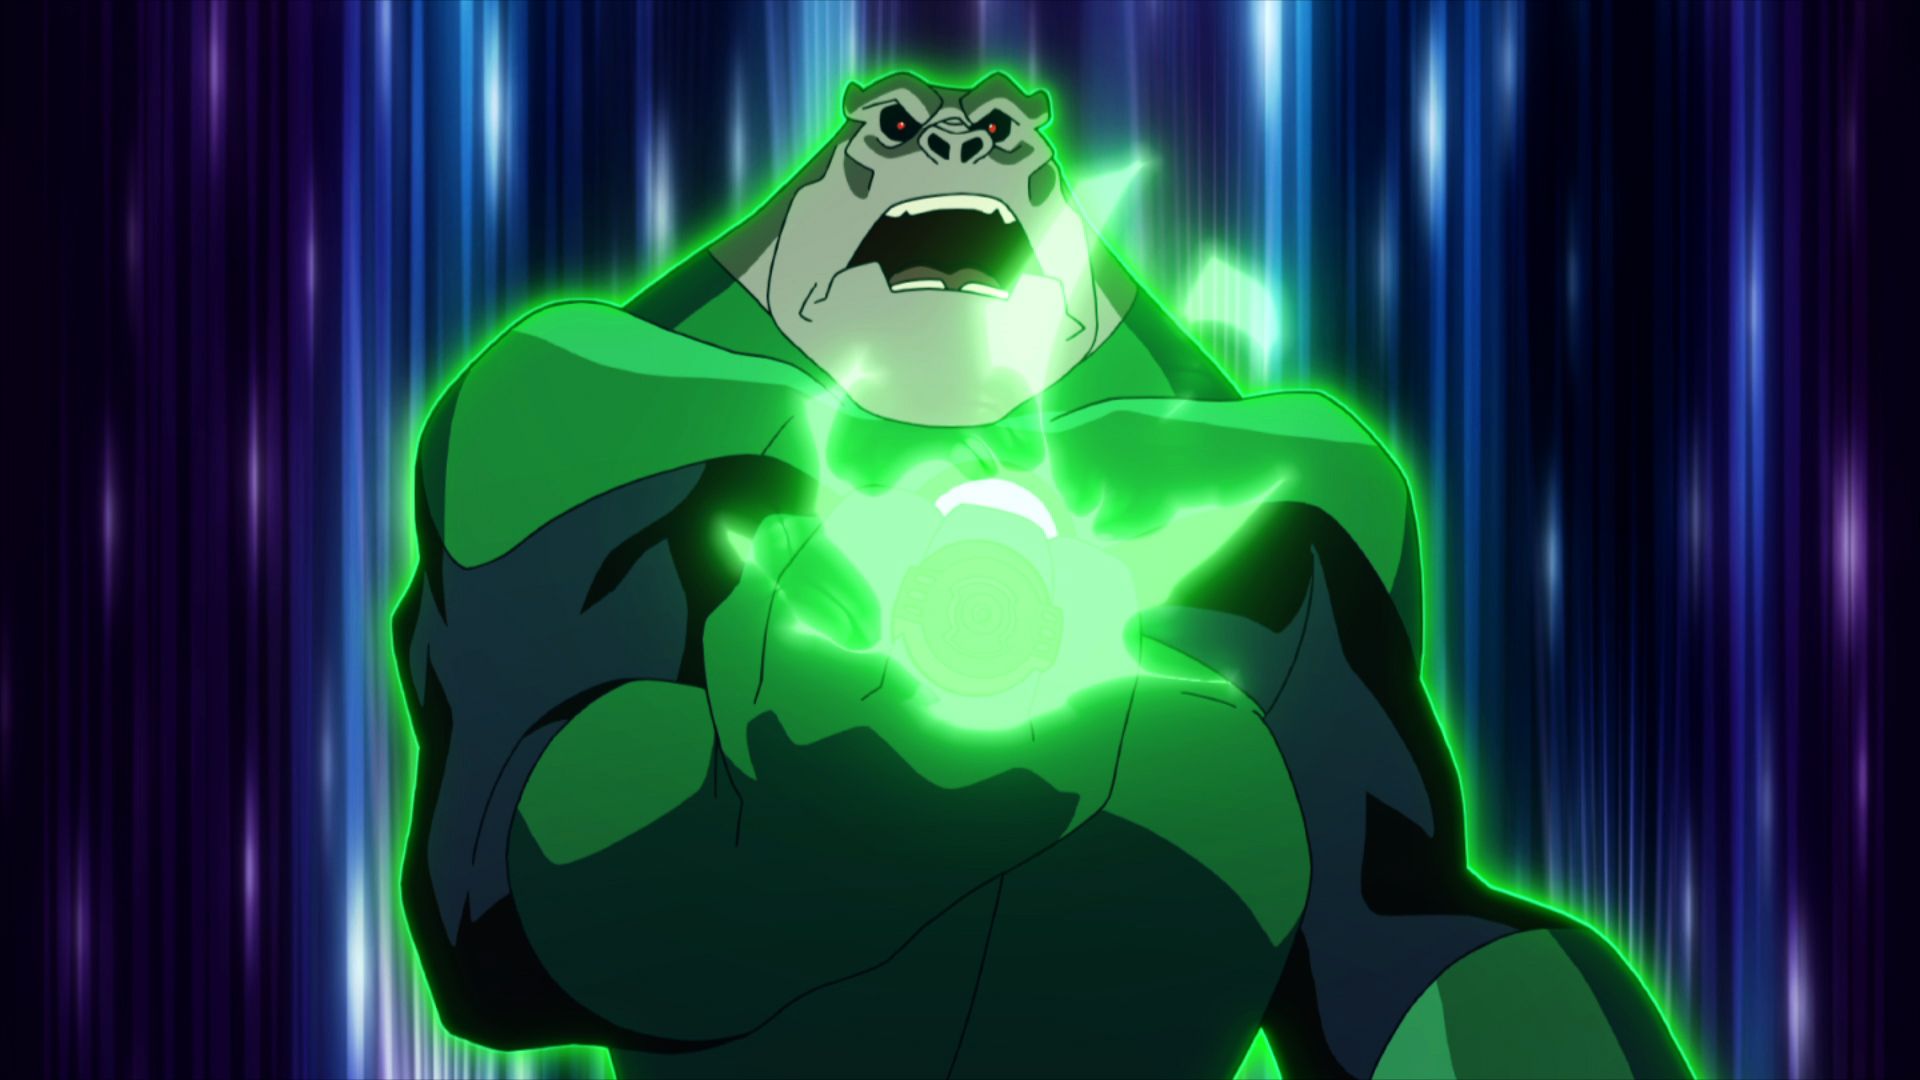 Henry Rollins discusses voicing Kilowog in Green Lantern: Emerald Knights